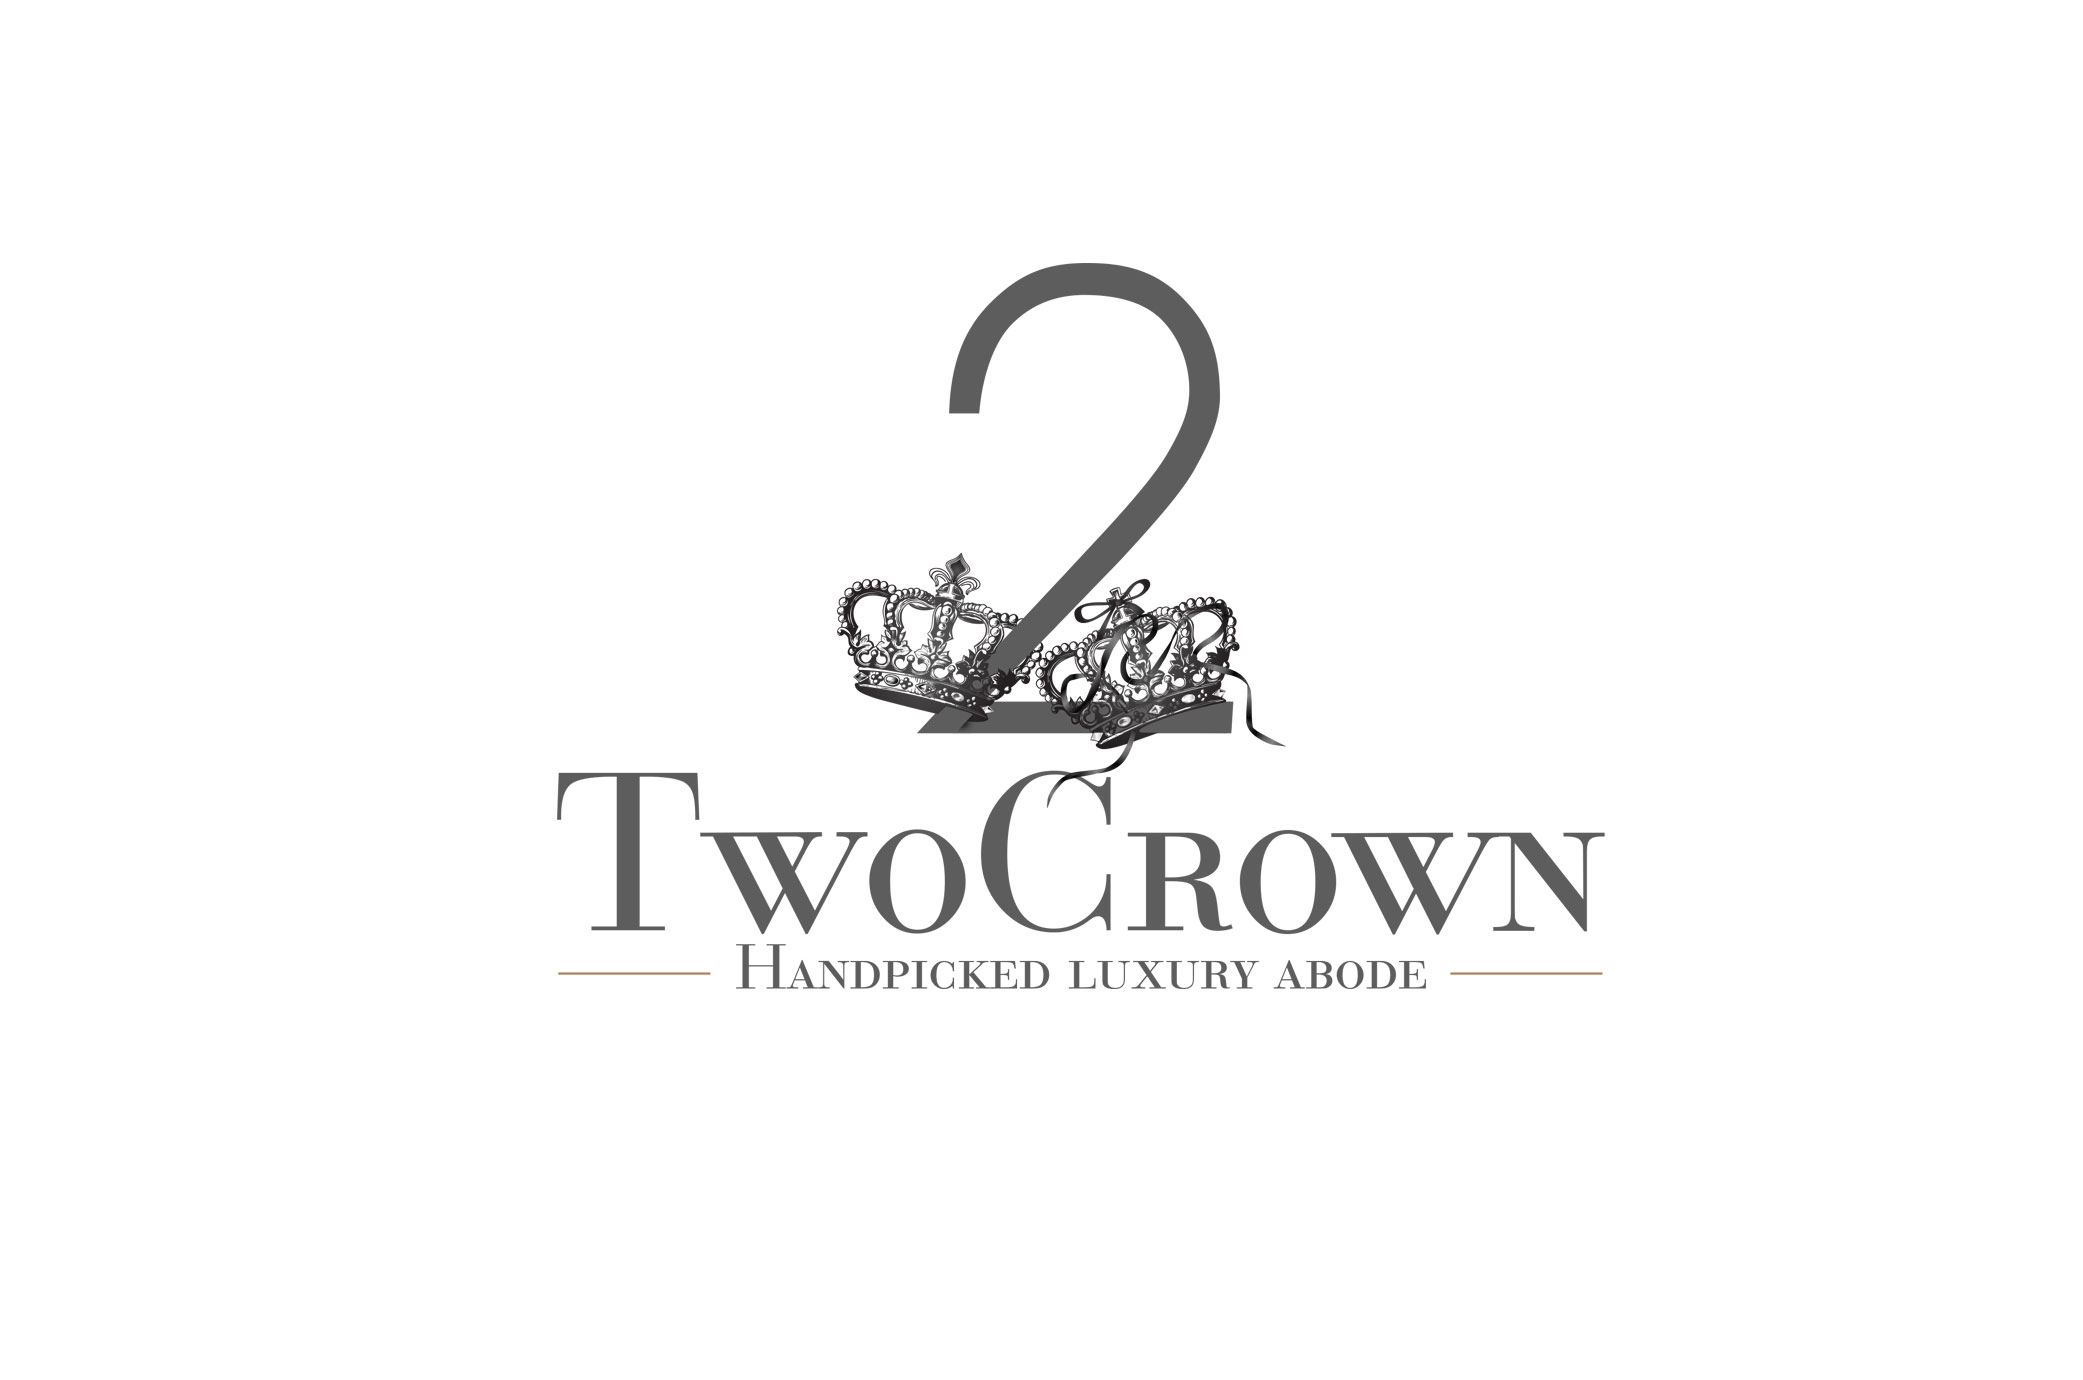 HandPicked Collection Of Luxury Stay TwoCrown - THE FASHIONABLE WAY, South Kensington, London, United Kingdom